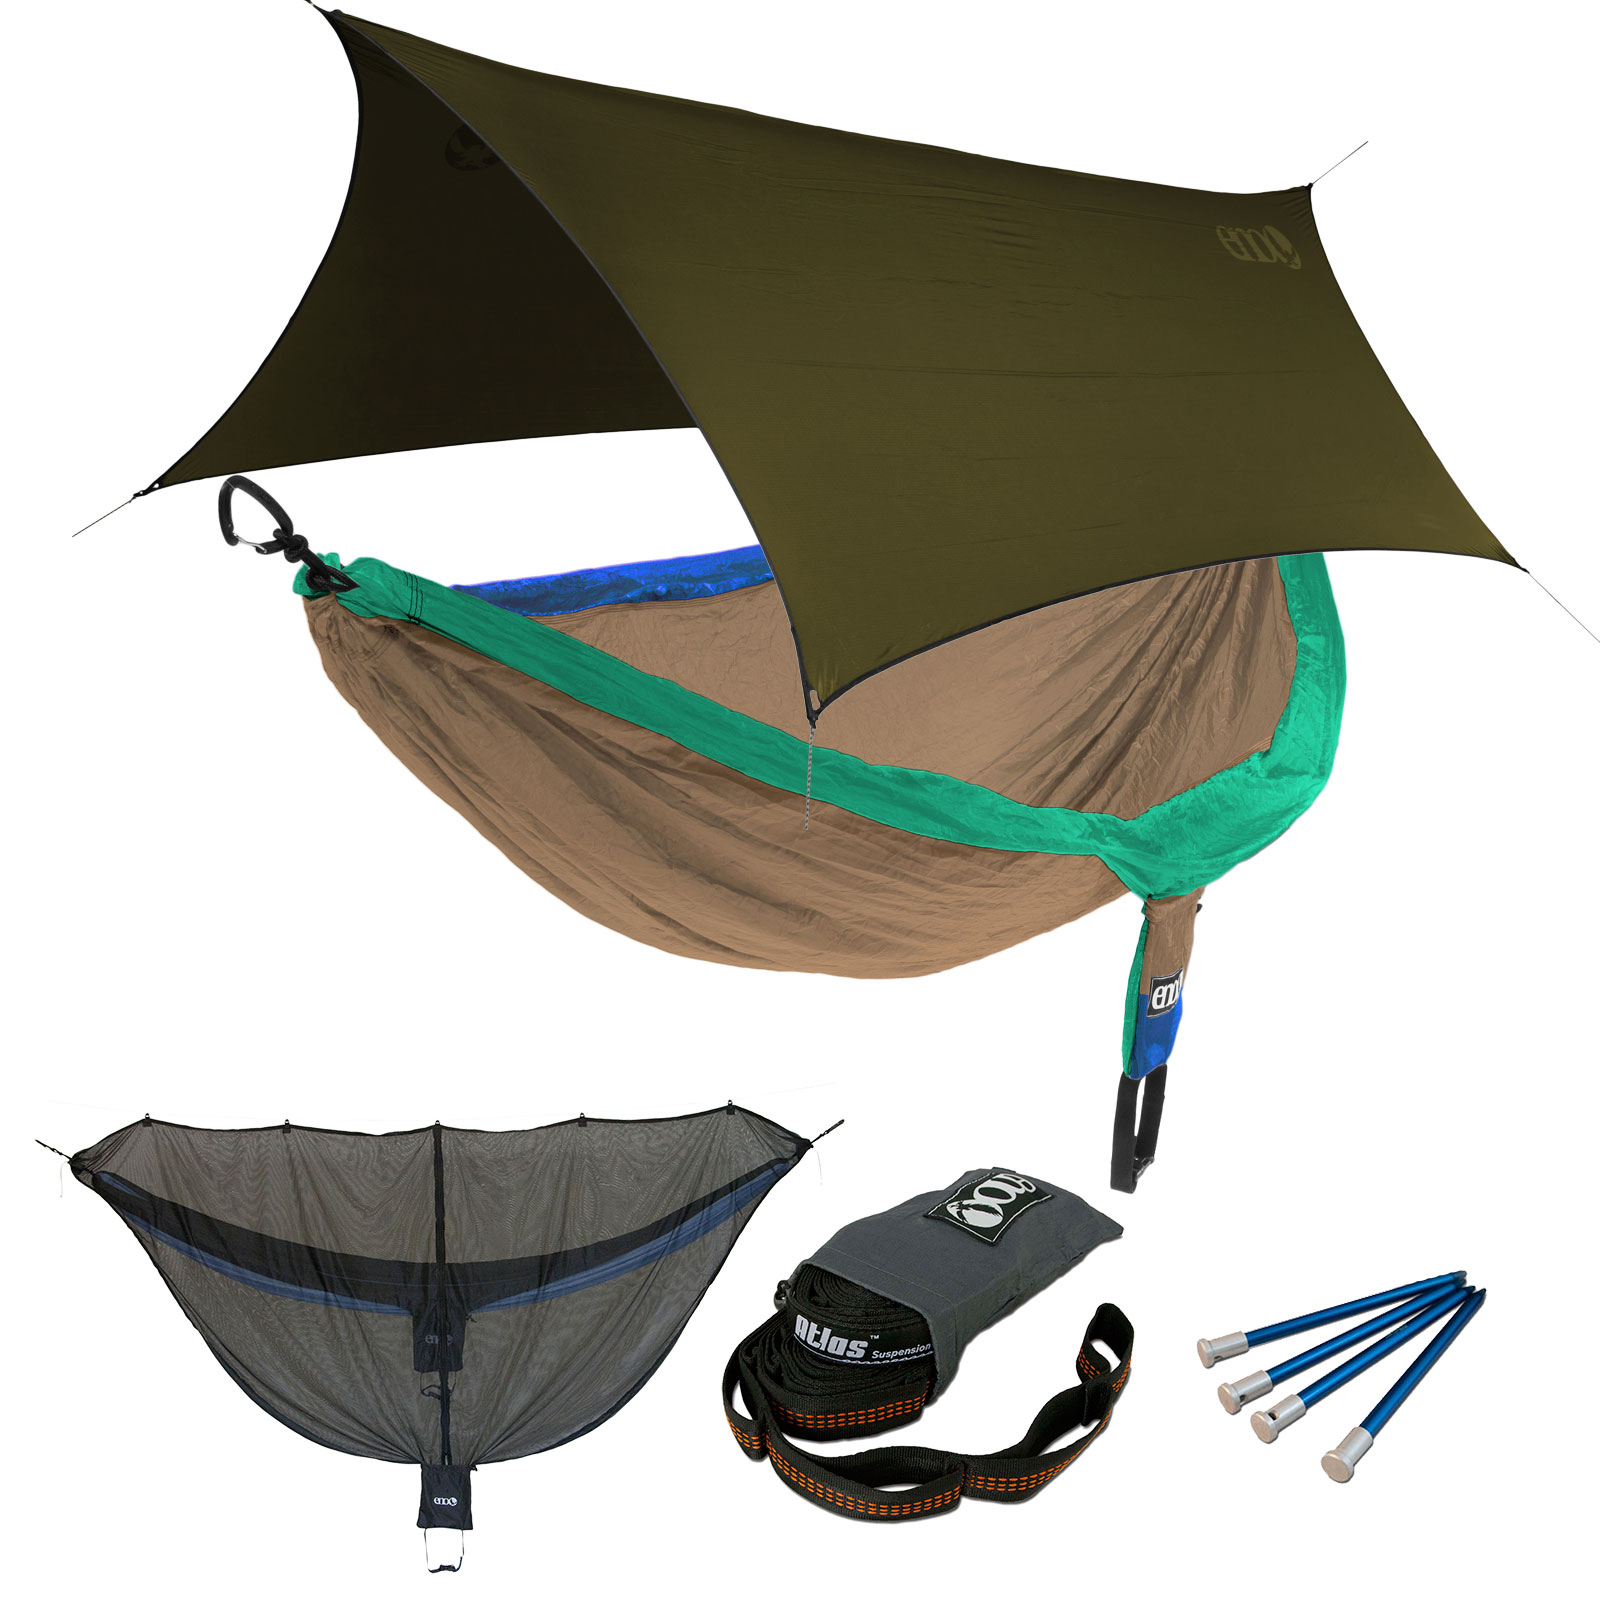 ENO DoubleNest OneLink Sleep System - ATC Special Edition Hammock & Olive Profly